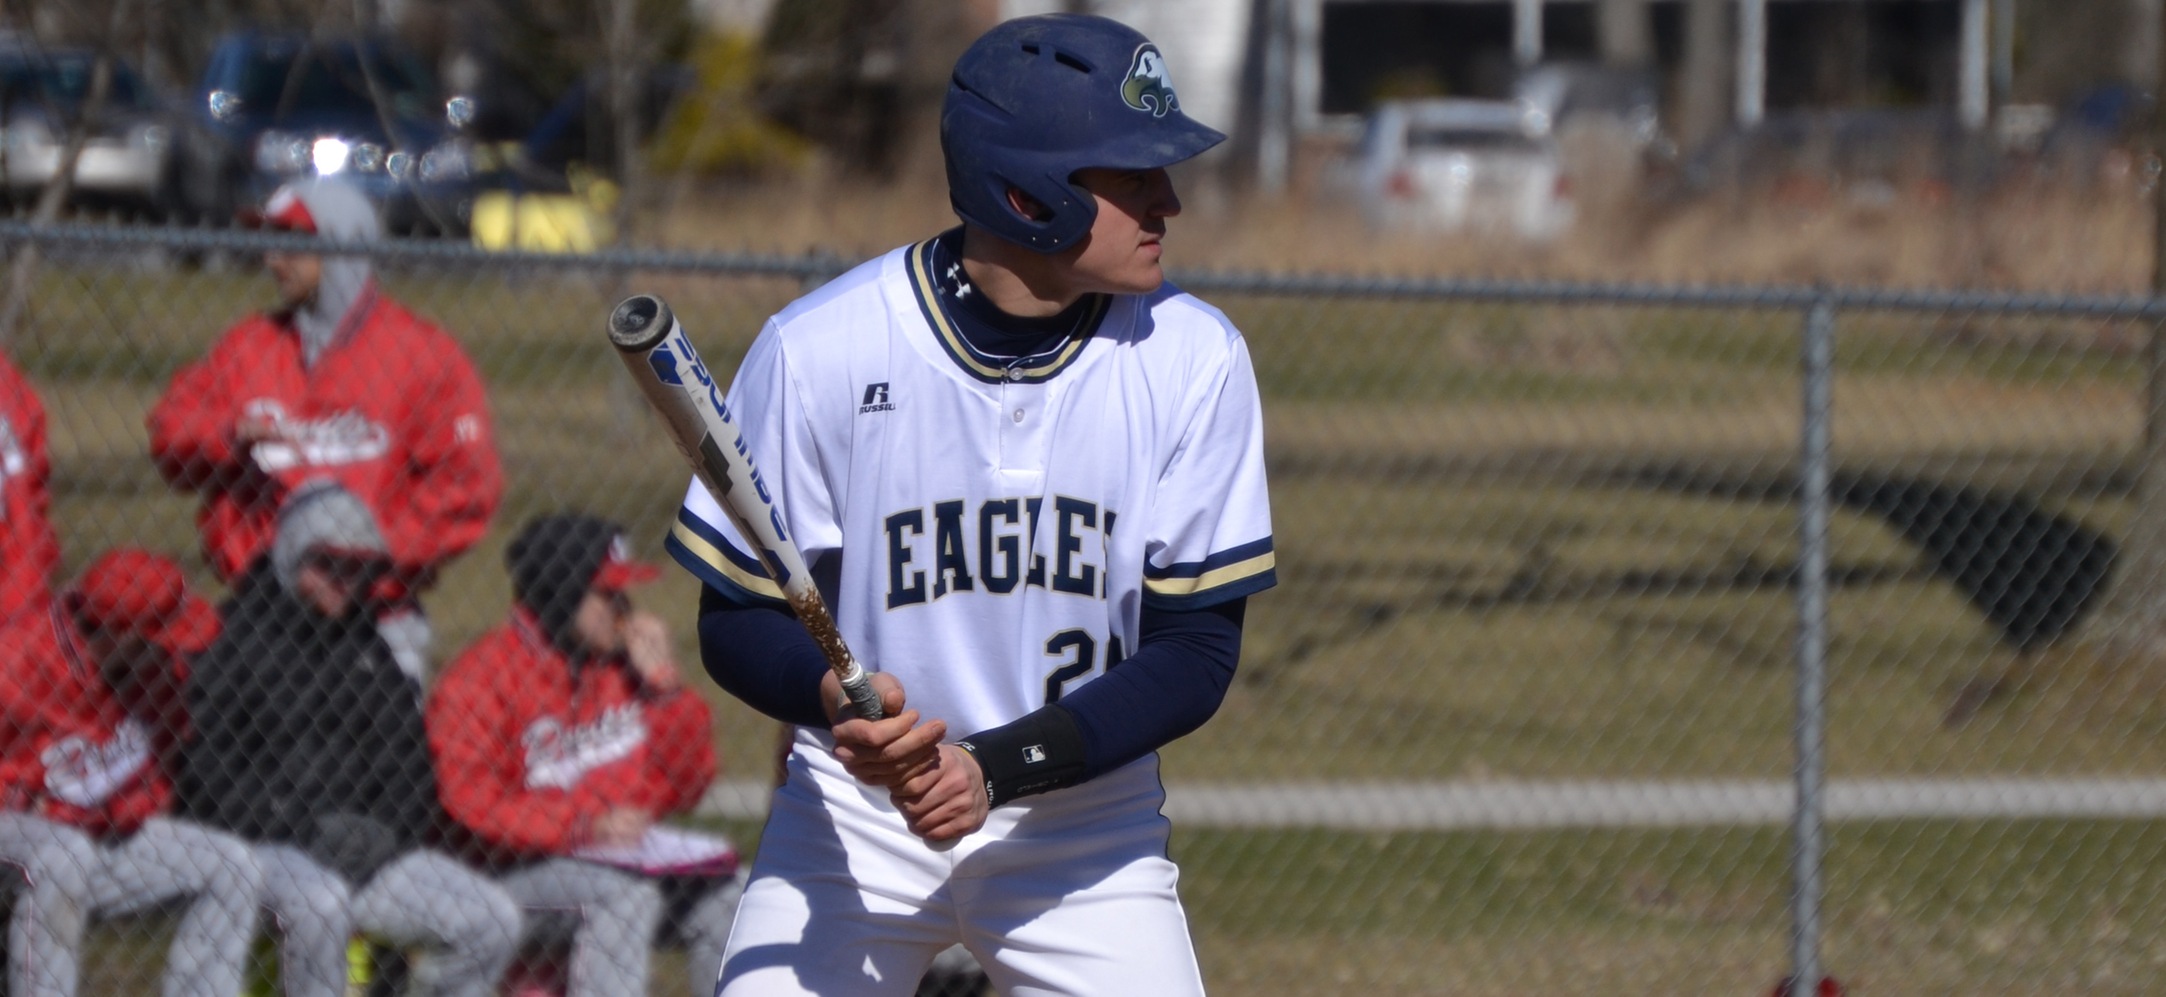 Isaac Maclay hit his second home run of the season in the first game against Keuka.